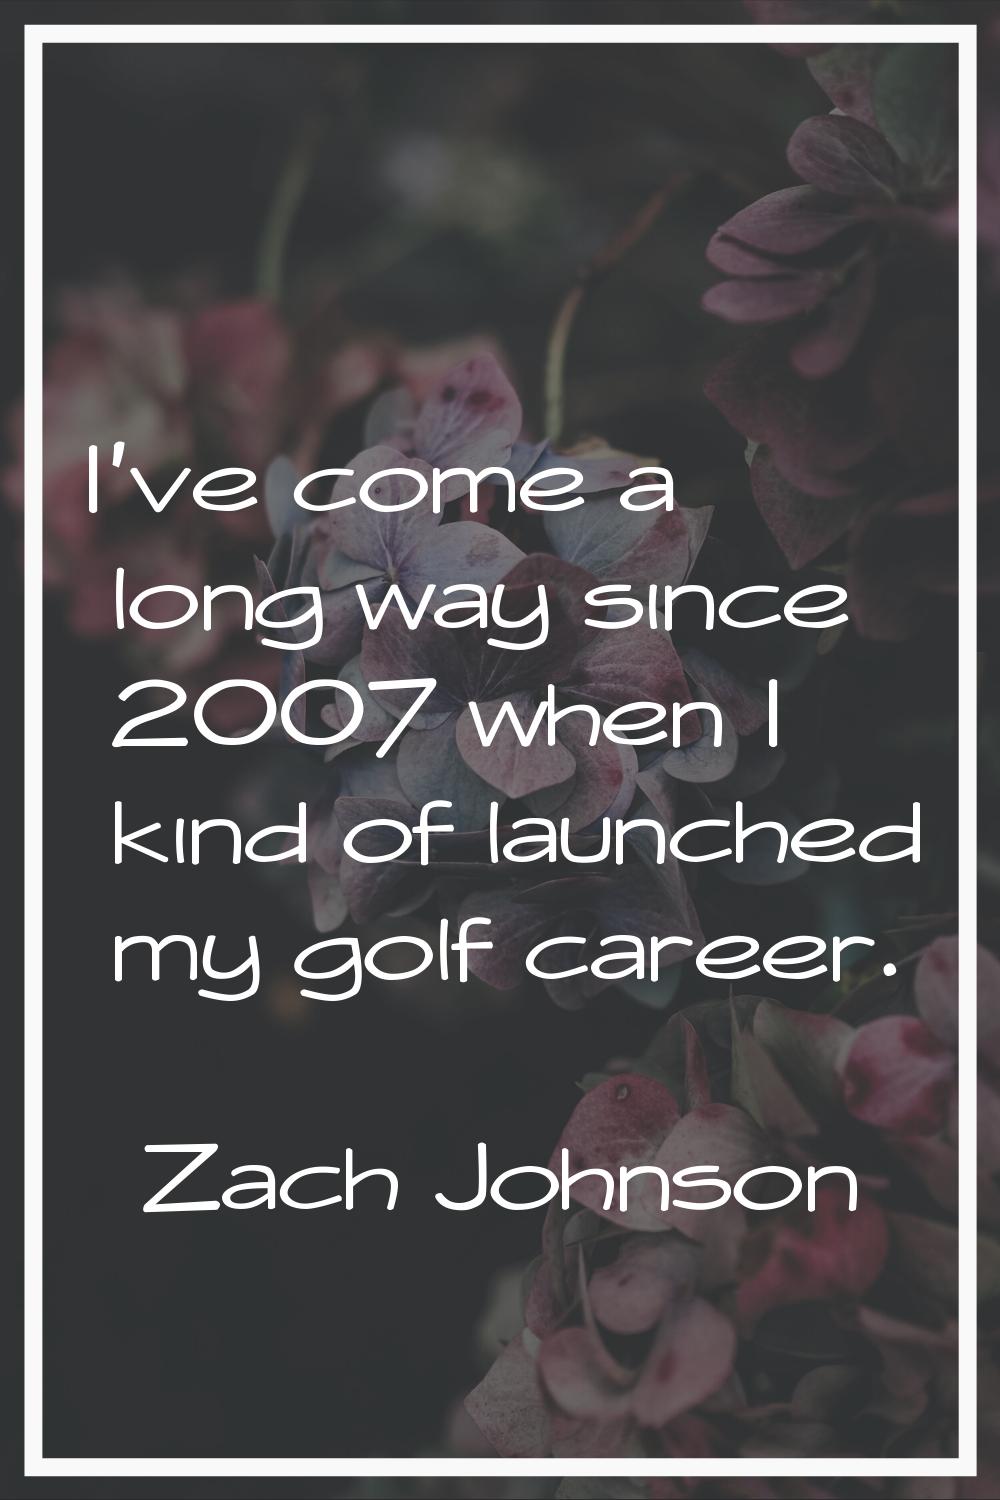 I've come a long way since 2007 when I kind of launched my golf career.